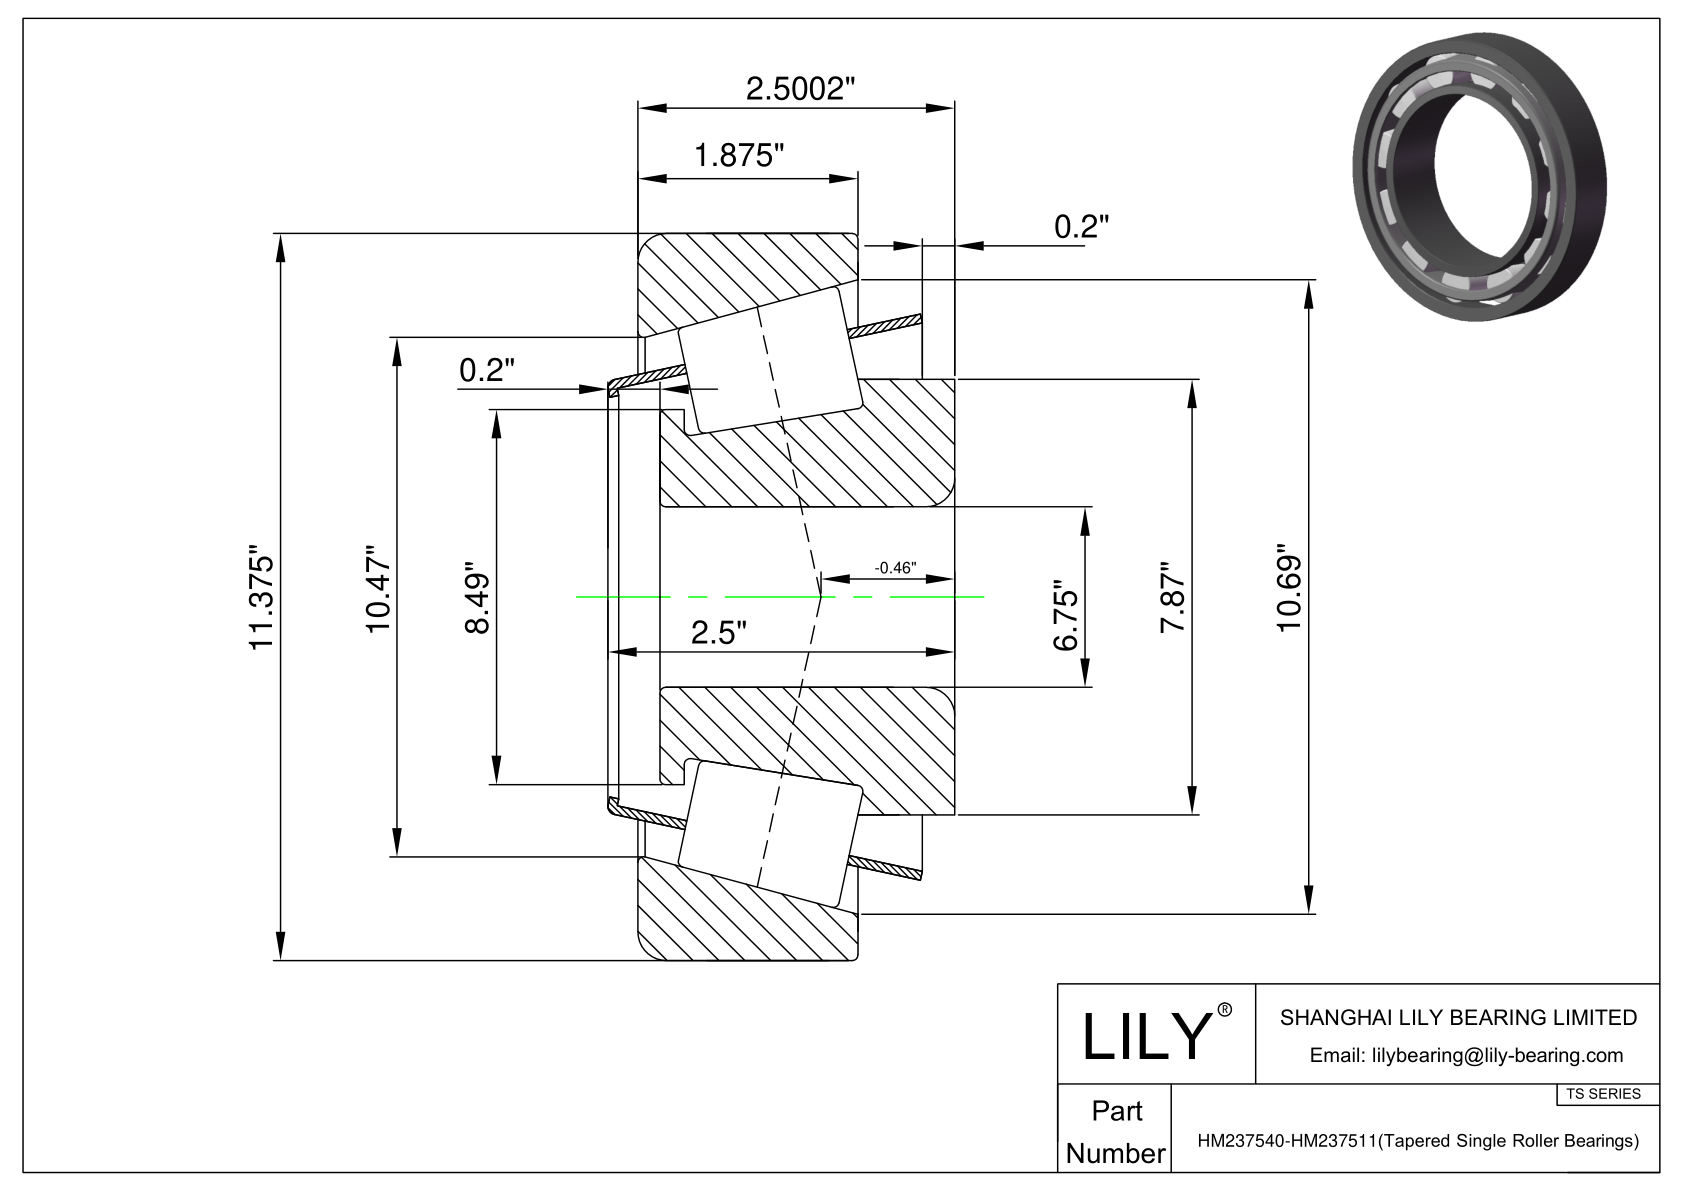 HM237540-HM237511 TS (Tapered Single Roller Bearings) (Imperial) cad drawing